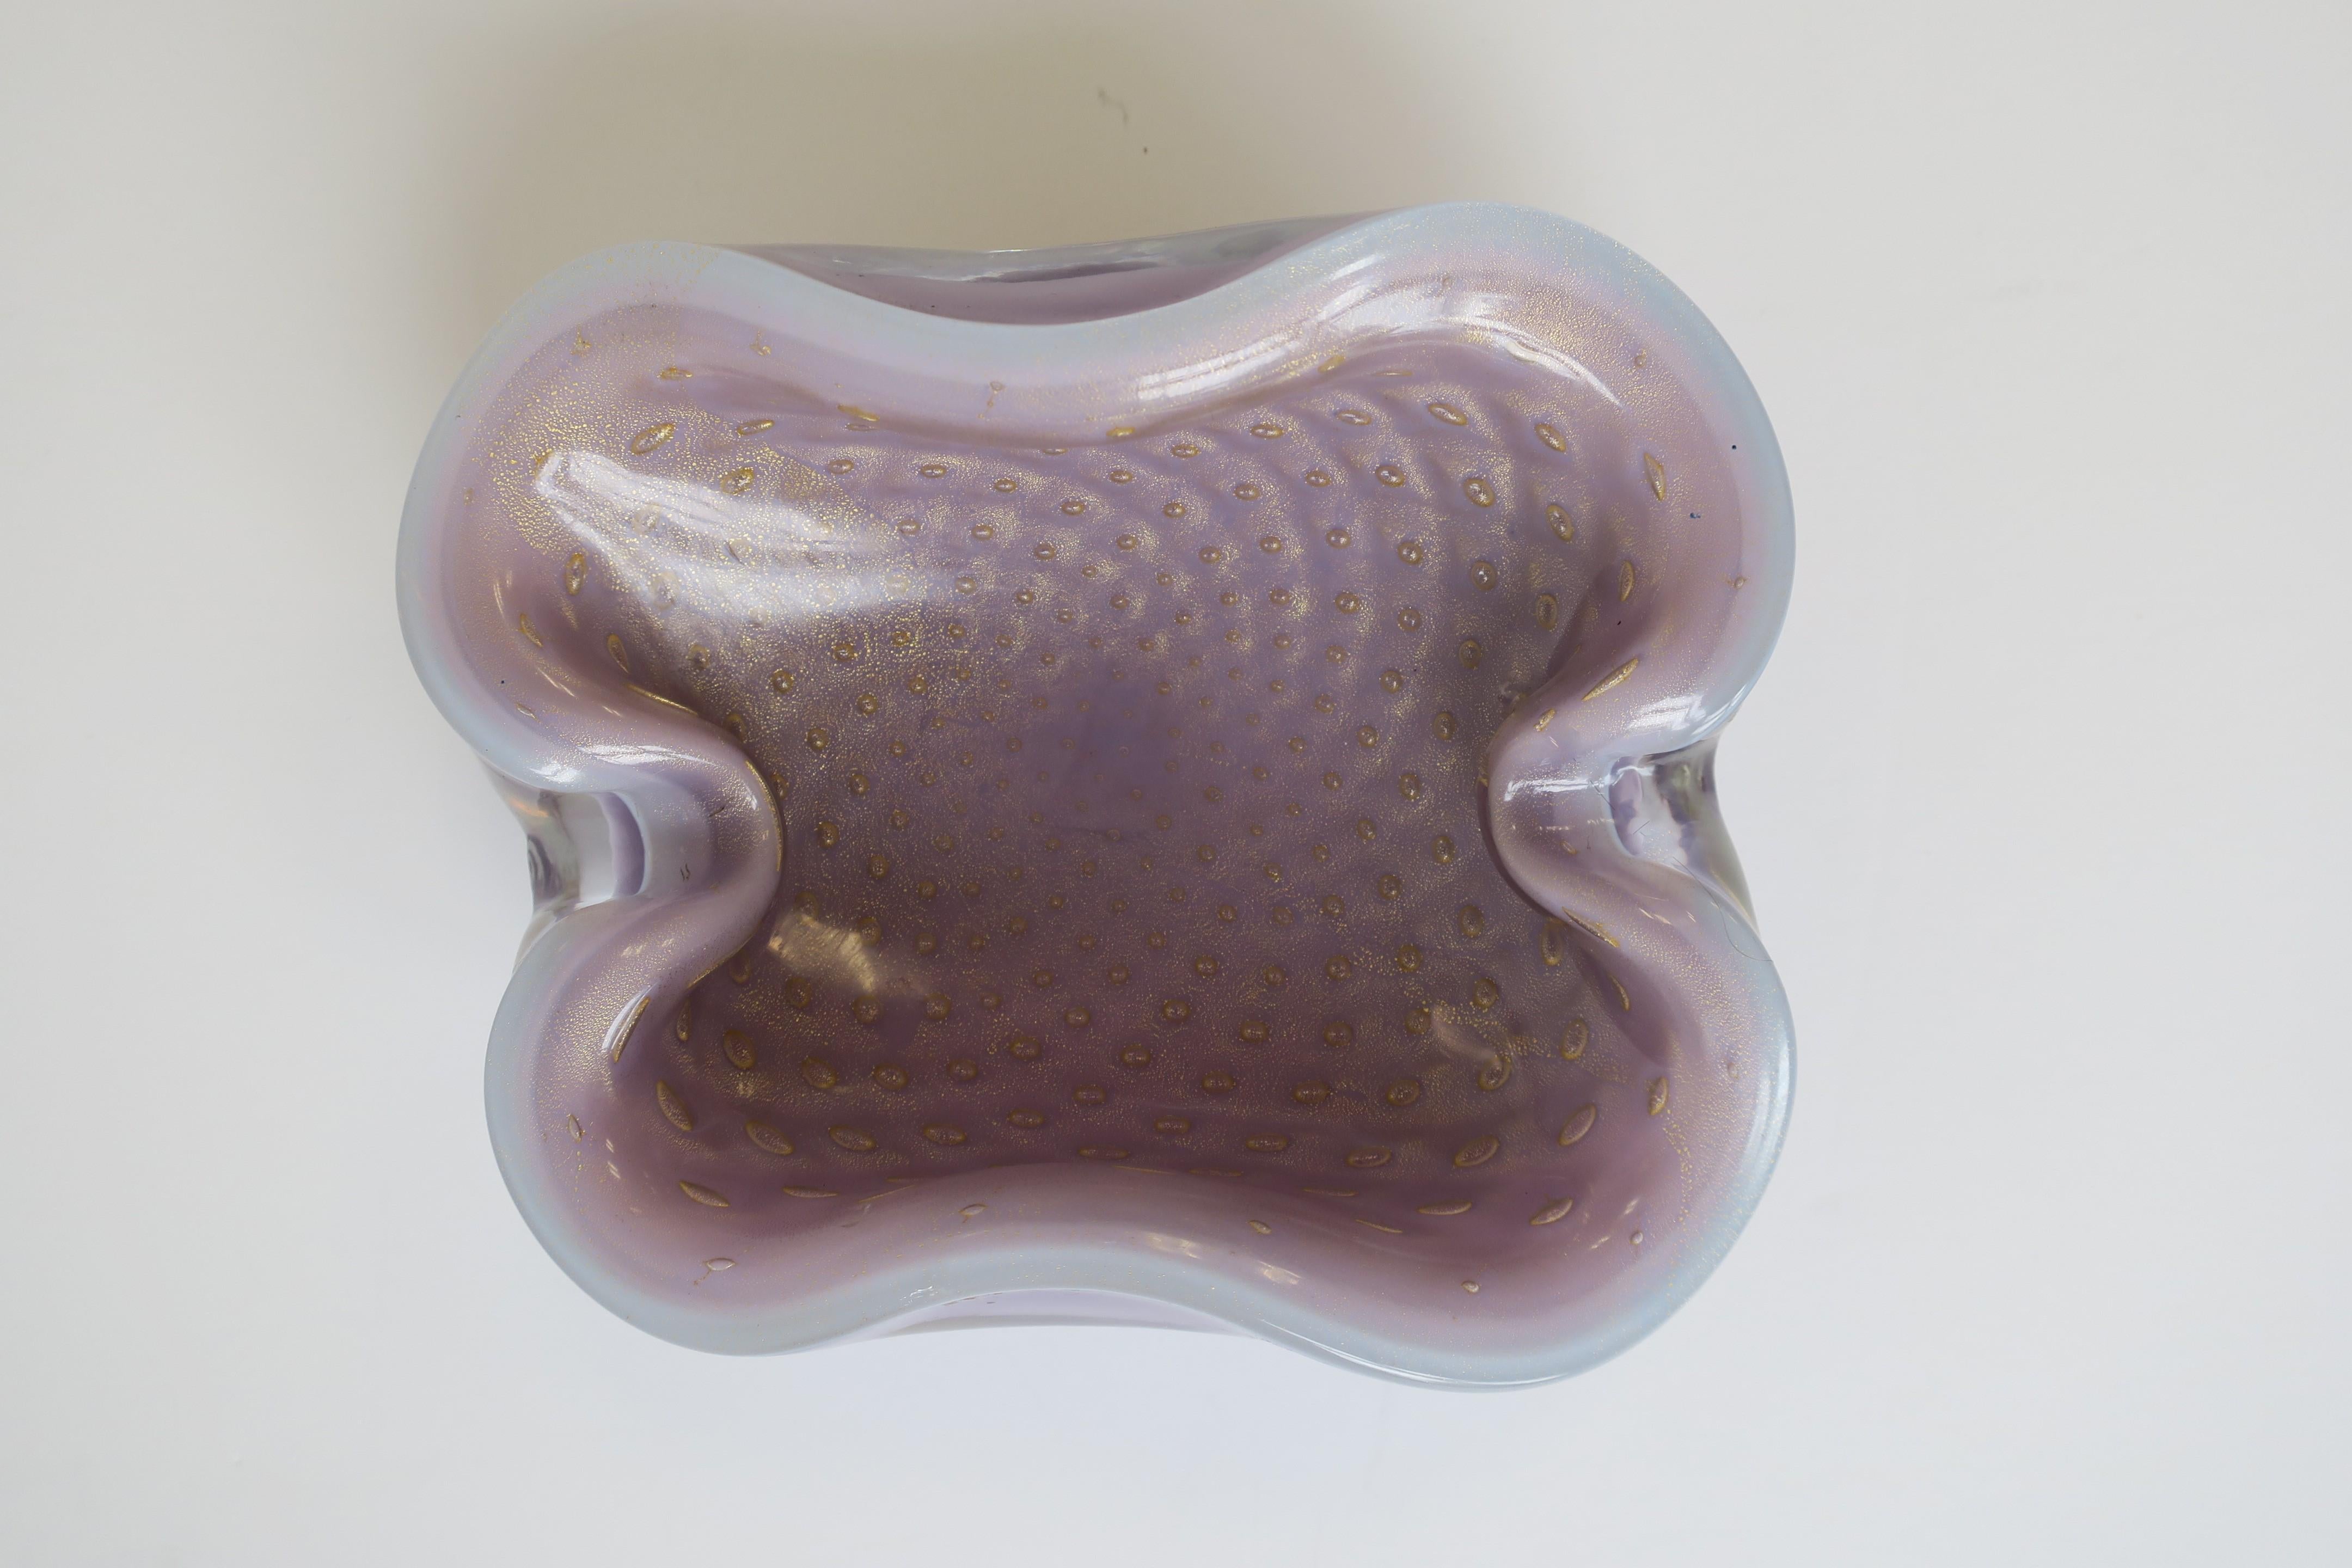 A beautiful and substantial mid-20th century Italian Murano art glass bowl in lavender/light purple, white and a gold 'controlled bubble' design, after designer Alfredo Barbini, circa 1960s, Italy. 

Measures: 4